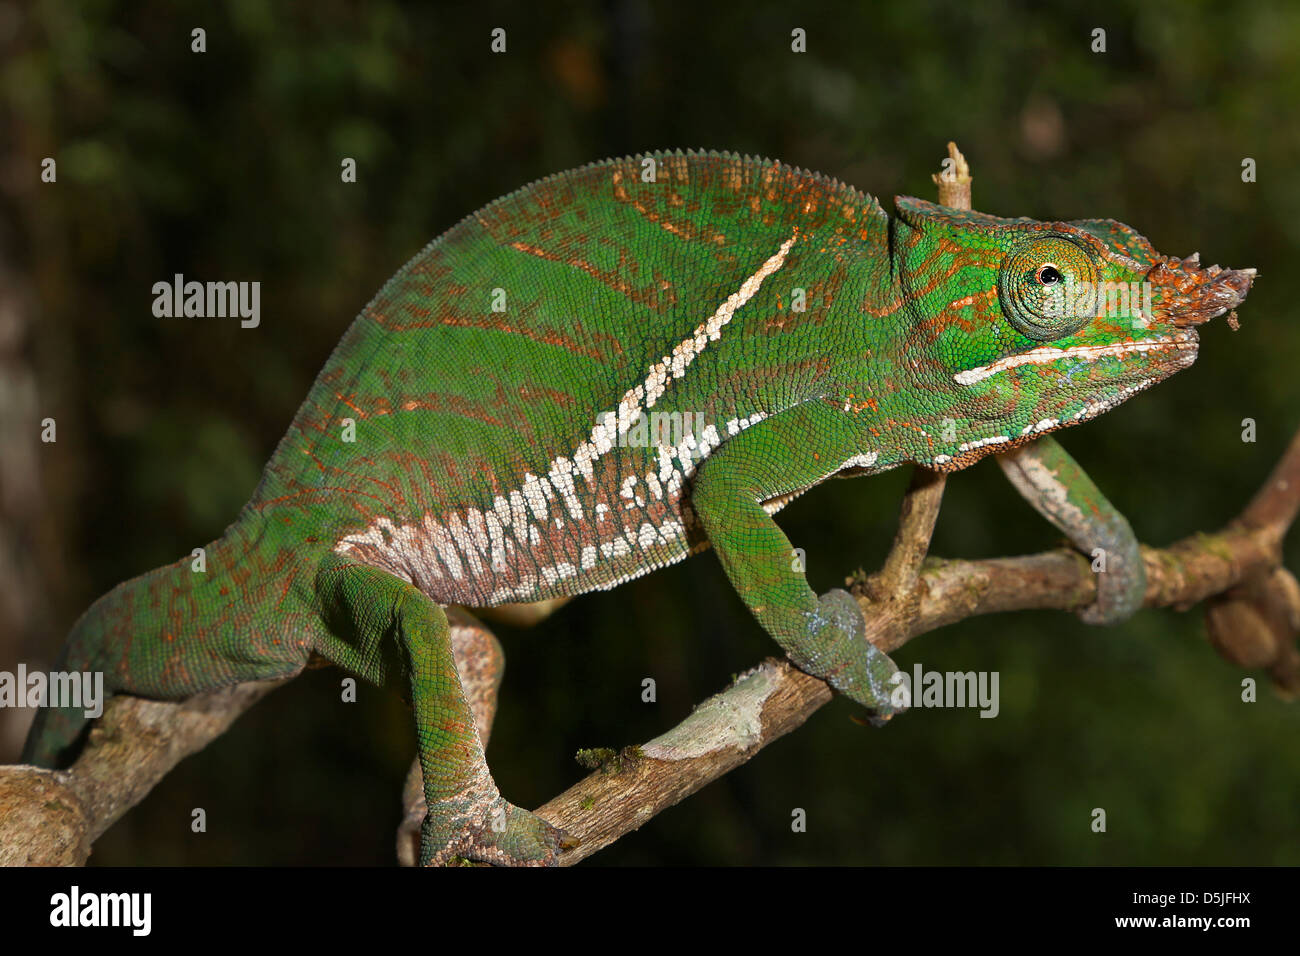 ENDANGERED Rainforest or Two-banded Chameleon (Furcifer balteatus) stalking insects in a tree in the wilds of Madagascar. Stock Photo